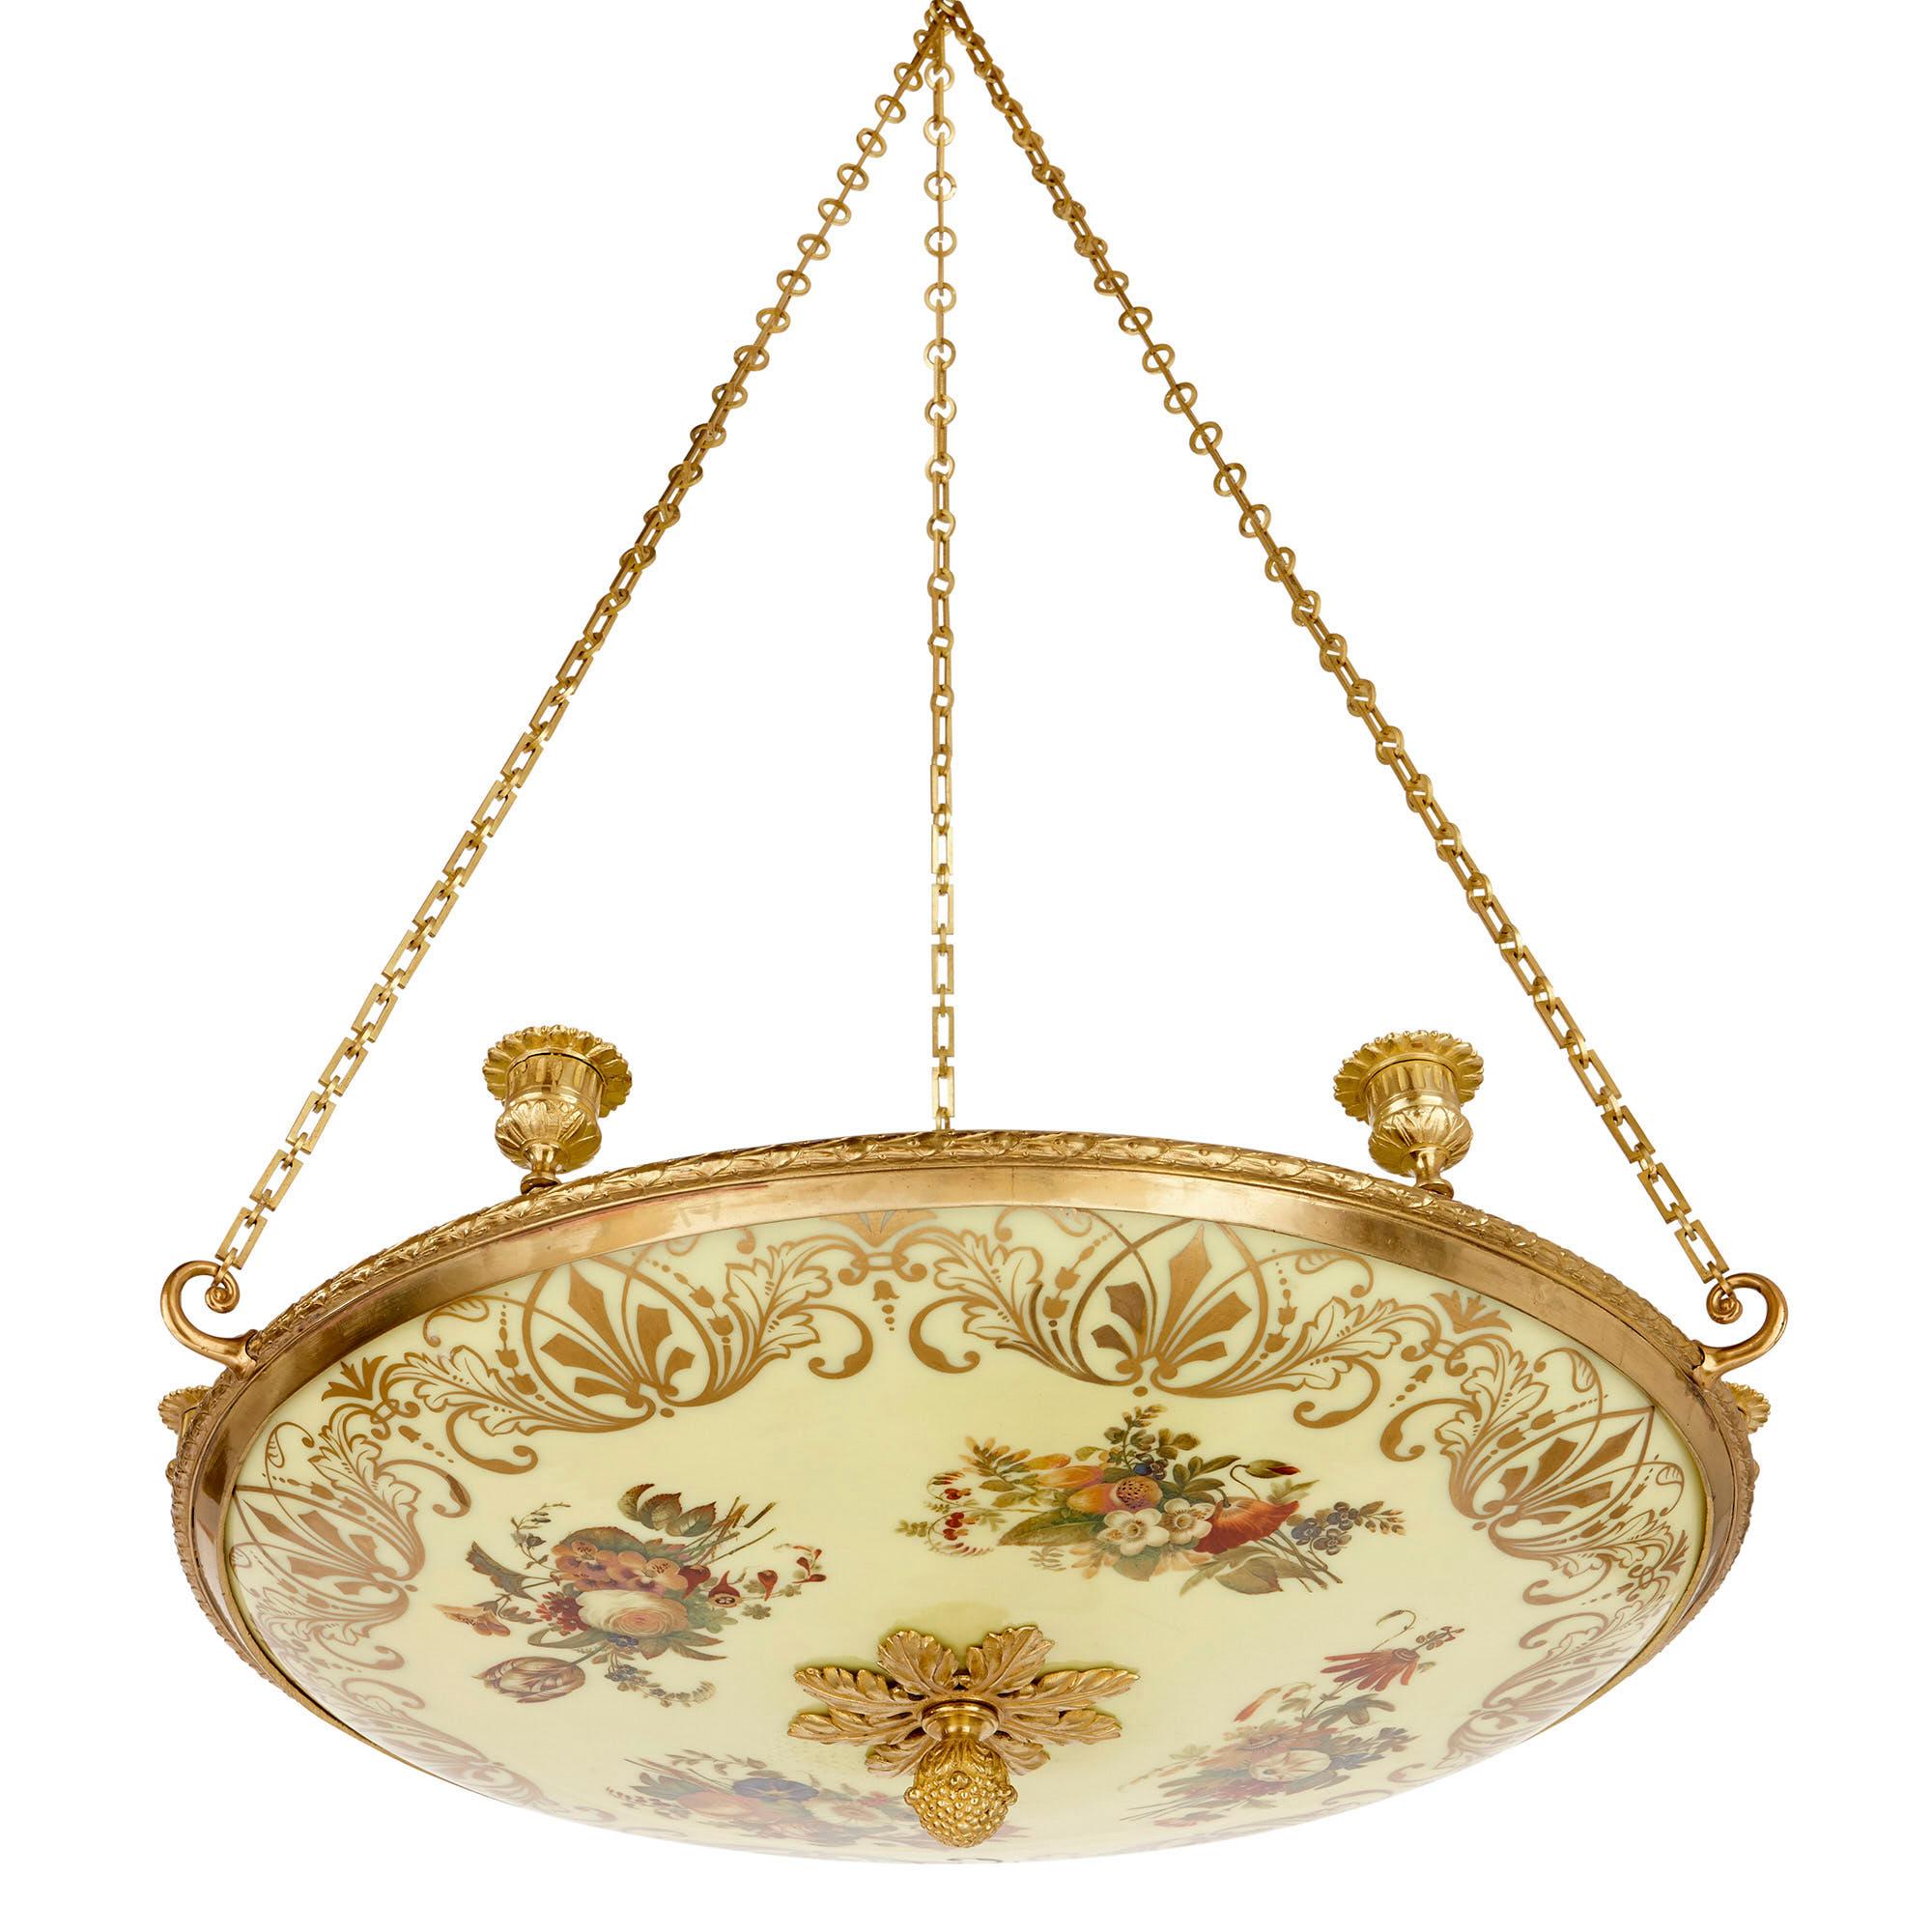 This shallow bowl chandelier is set within a gilt bronze (ormolu) mount, which is designed in the manner of a stylised wreath. The mount supports six candle holders and is suspended from three gilt bronze chains, the links of which take the form of